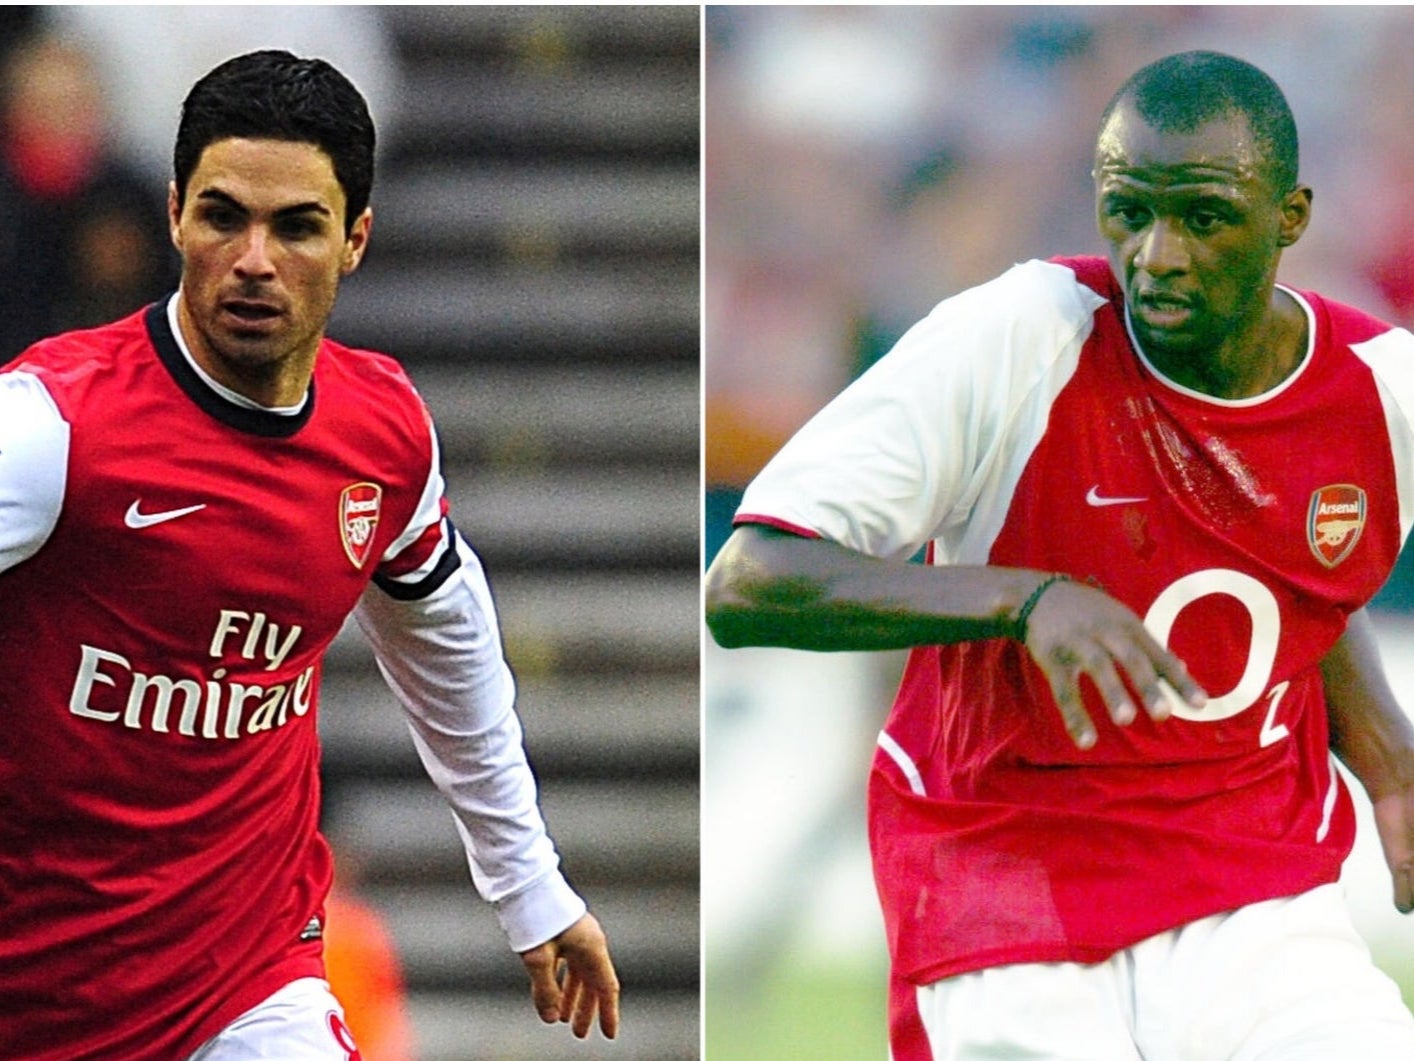 Both Mikel Arteta and Patrick Vieira captained Arsenal during their playing careers